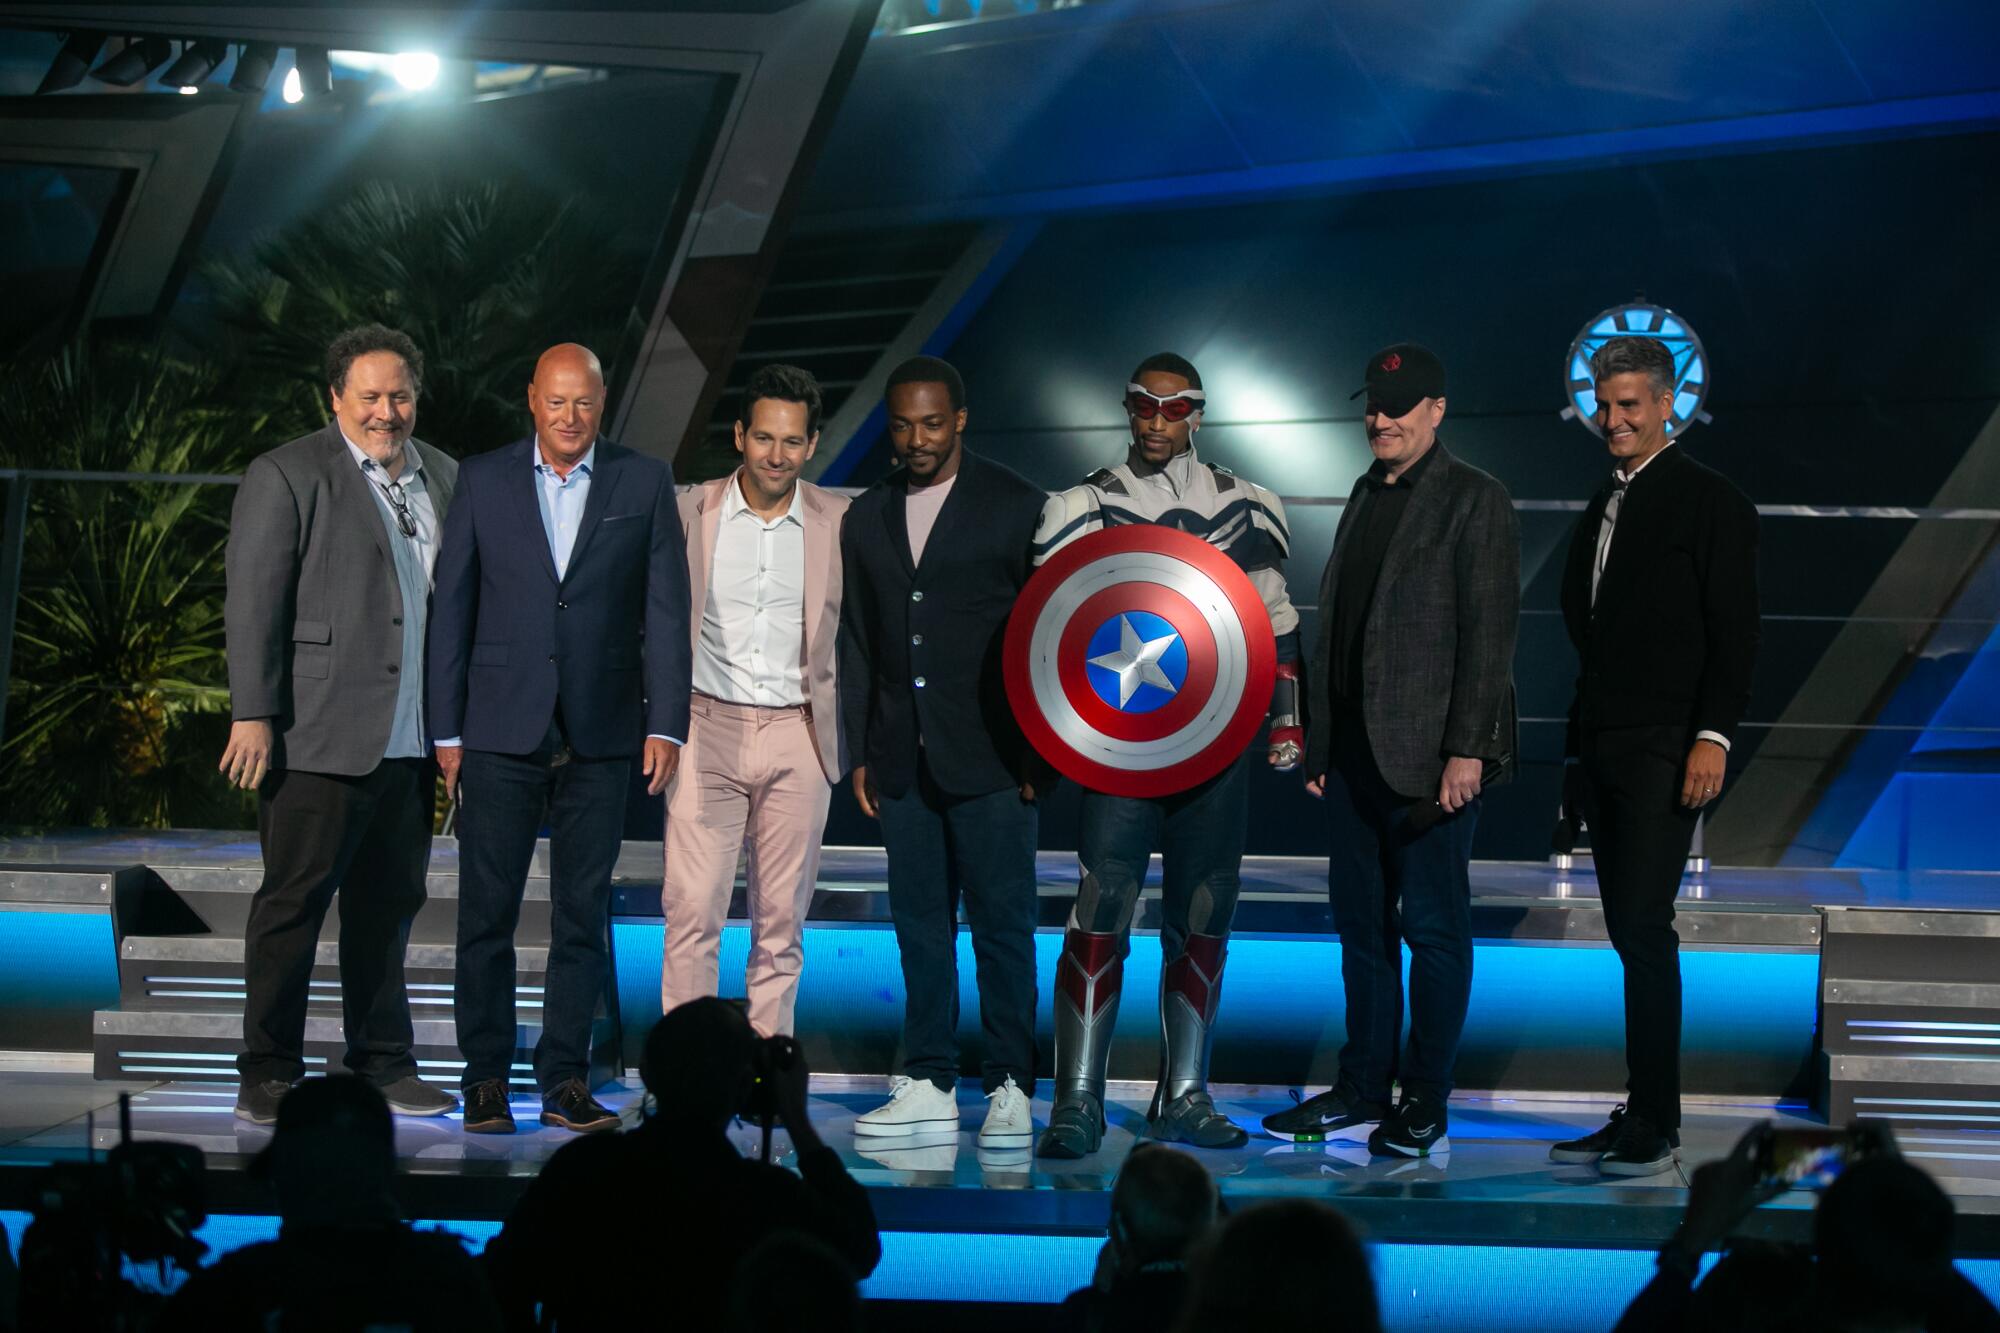 Jon Favreau, Paul Rudd and Anthony Mackie pose with the Captain America actor and Disney executives.